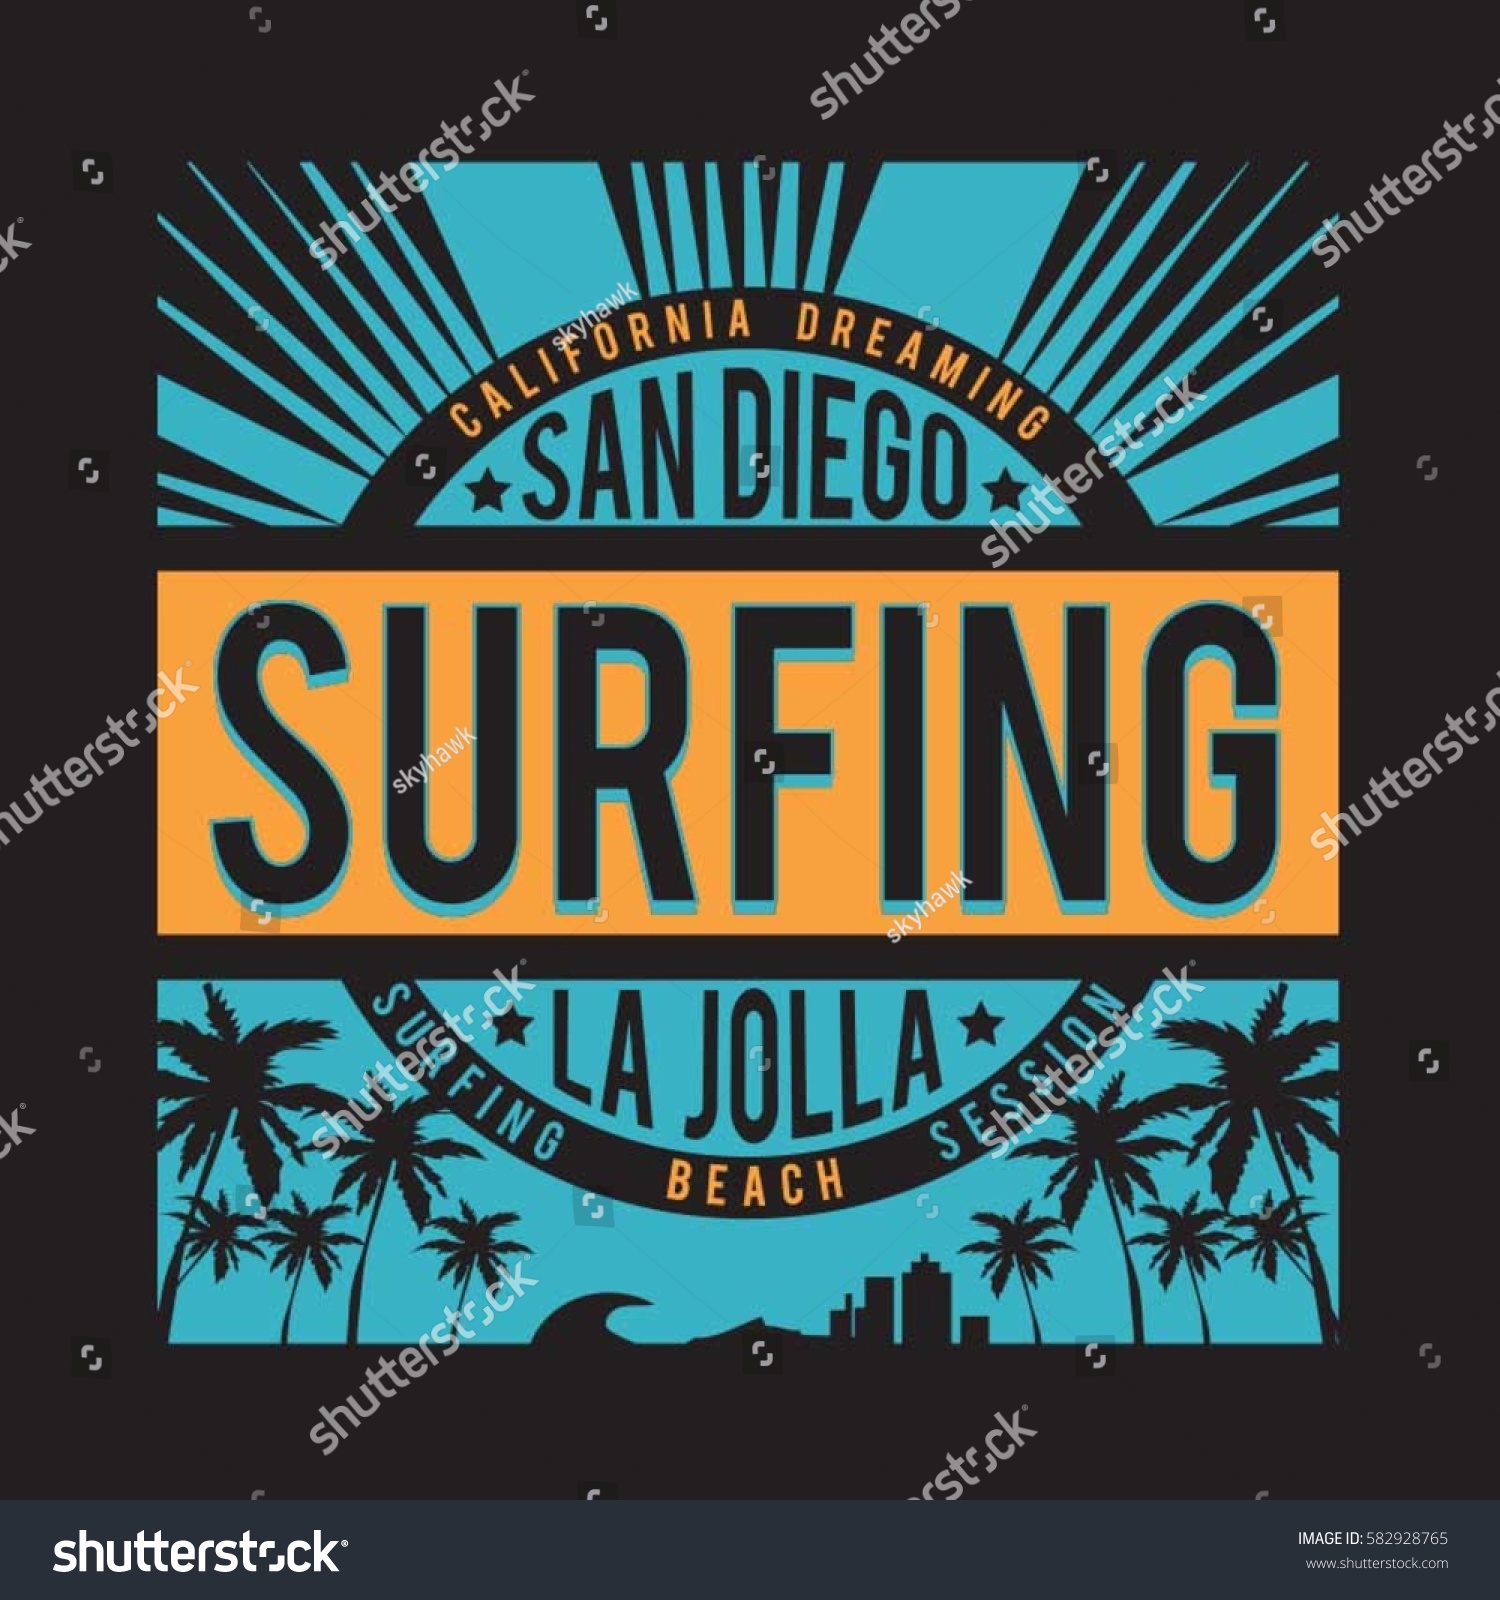 Surfing San Diego Typography Tee Shirt Stock Vector (Royalty Free ...